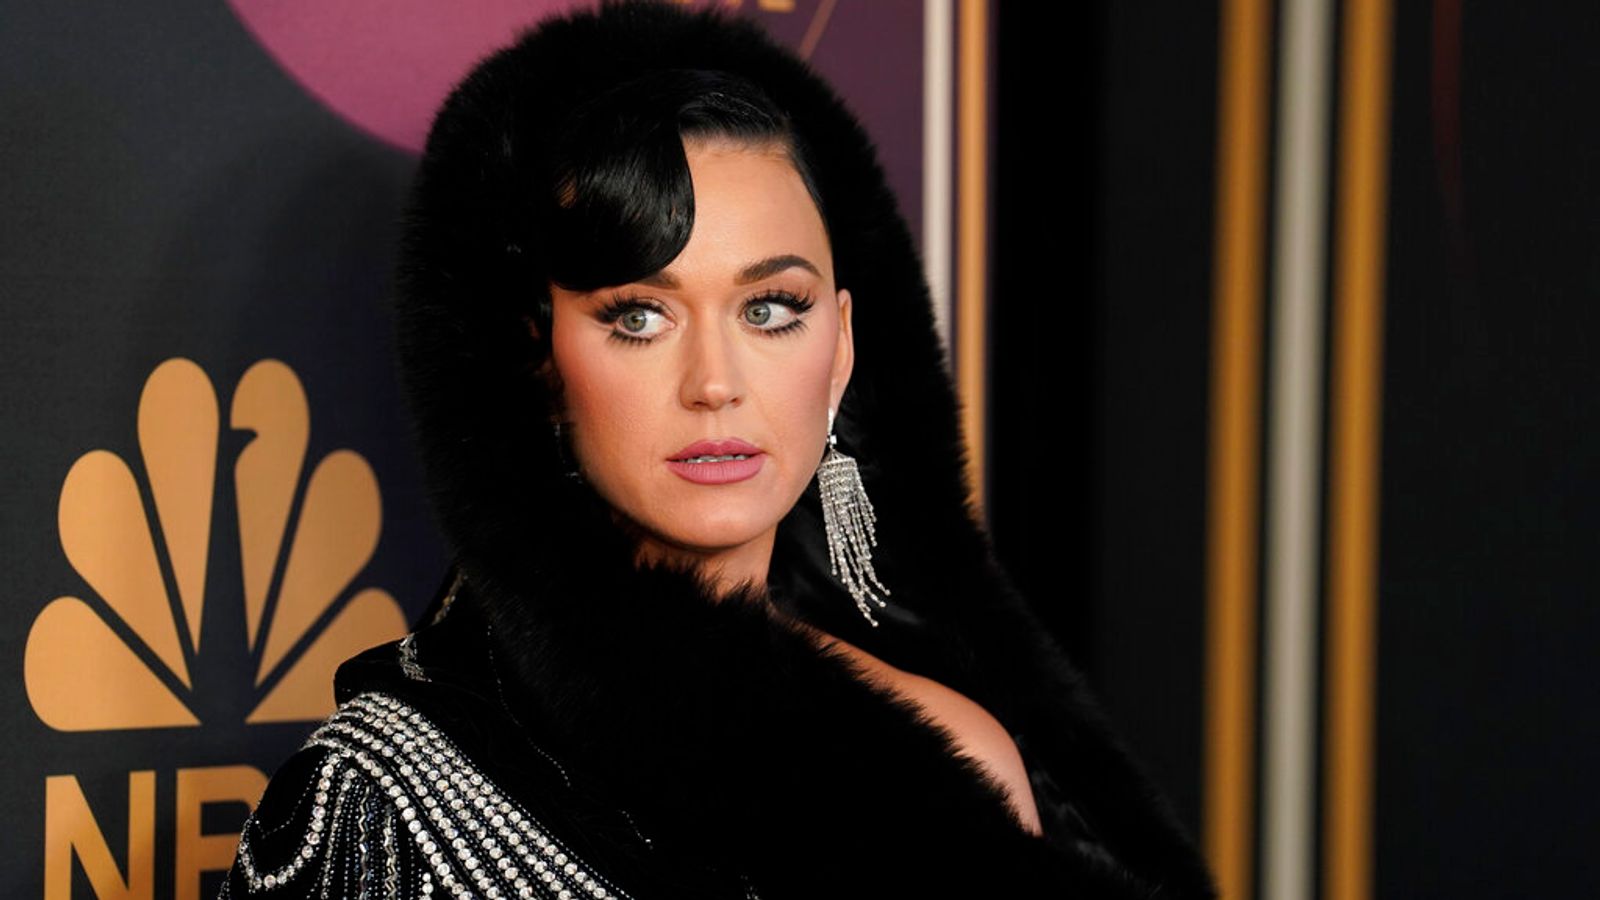 Katy Perry: US pop star loses trademark battle against fashion designer with same name